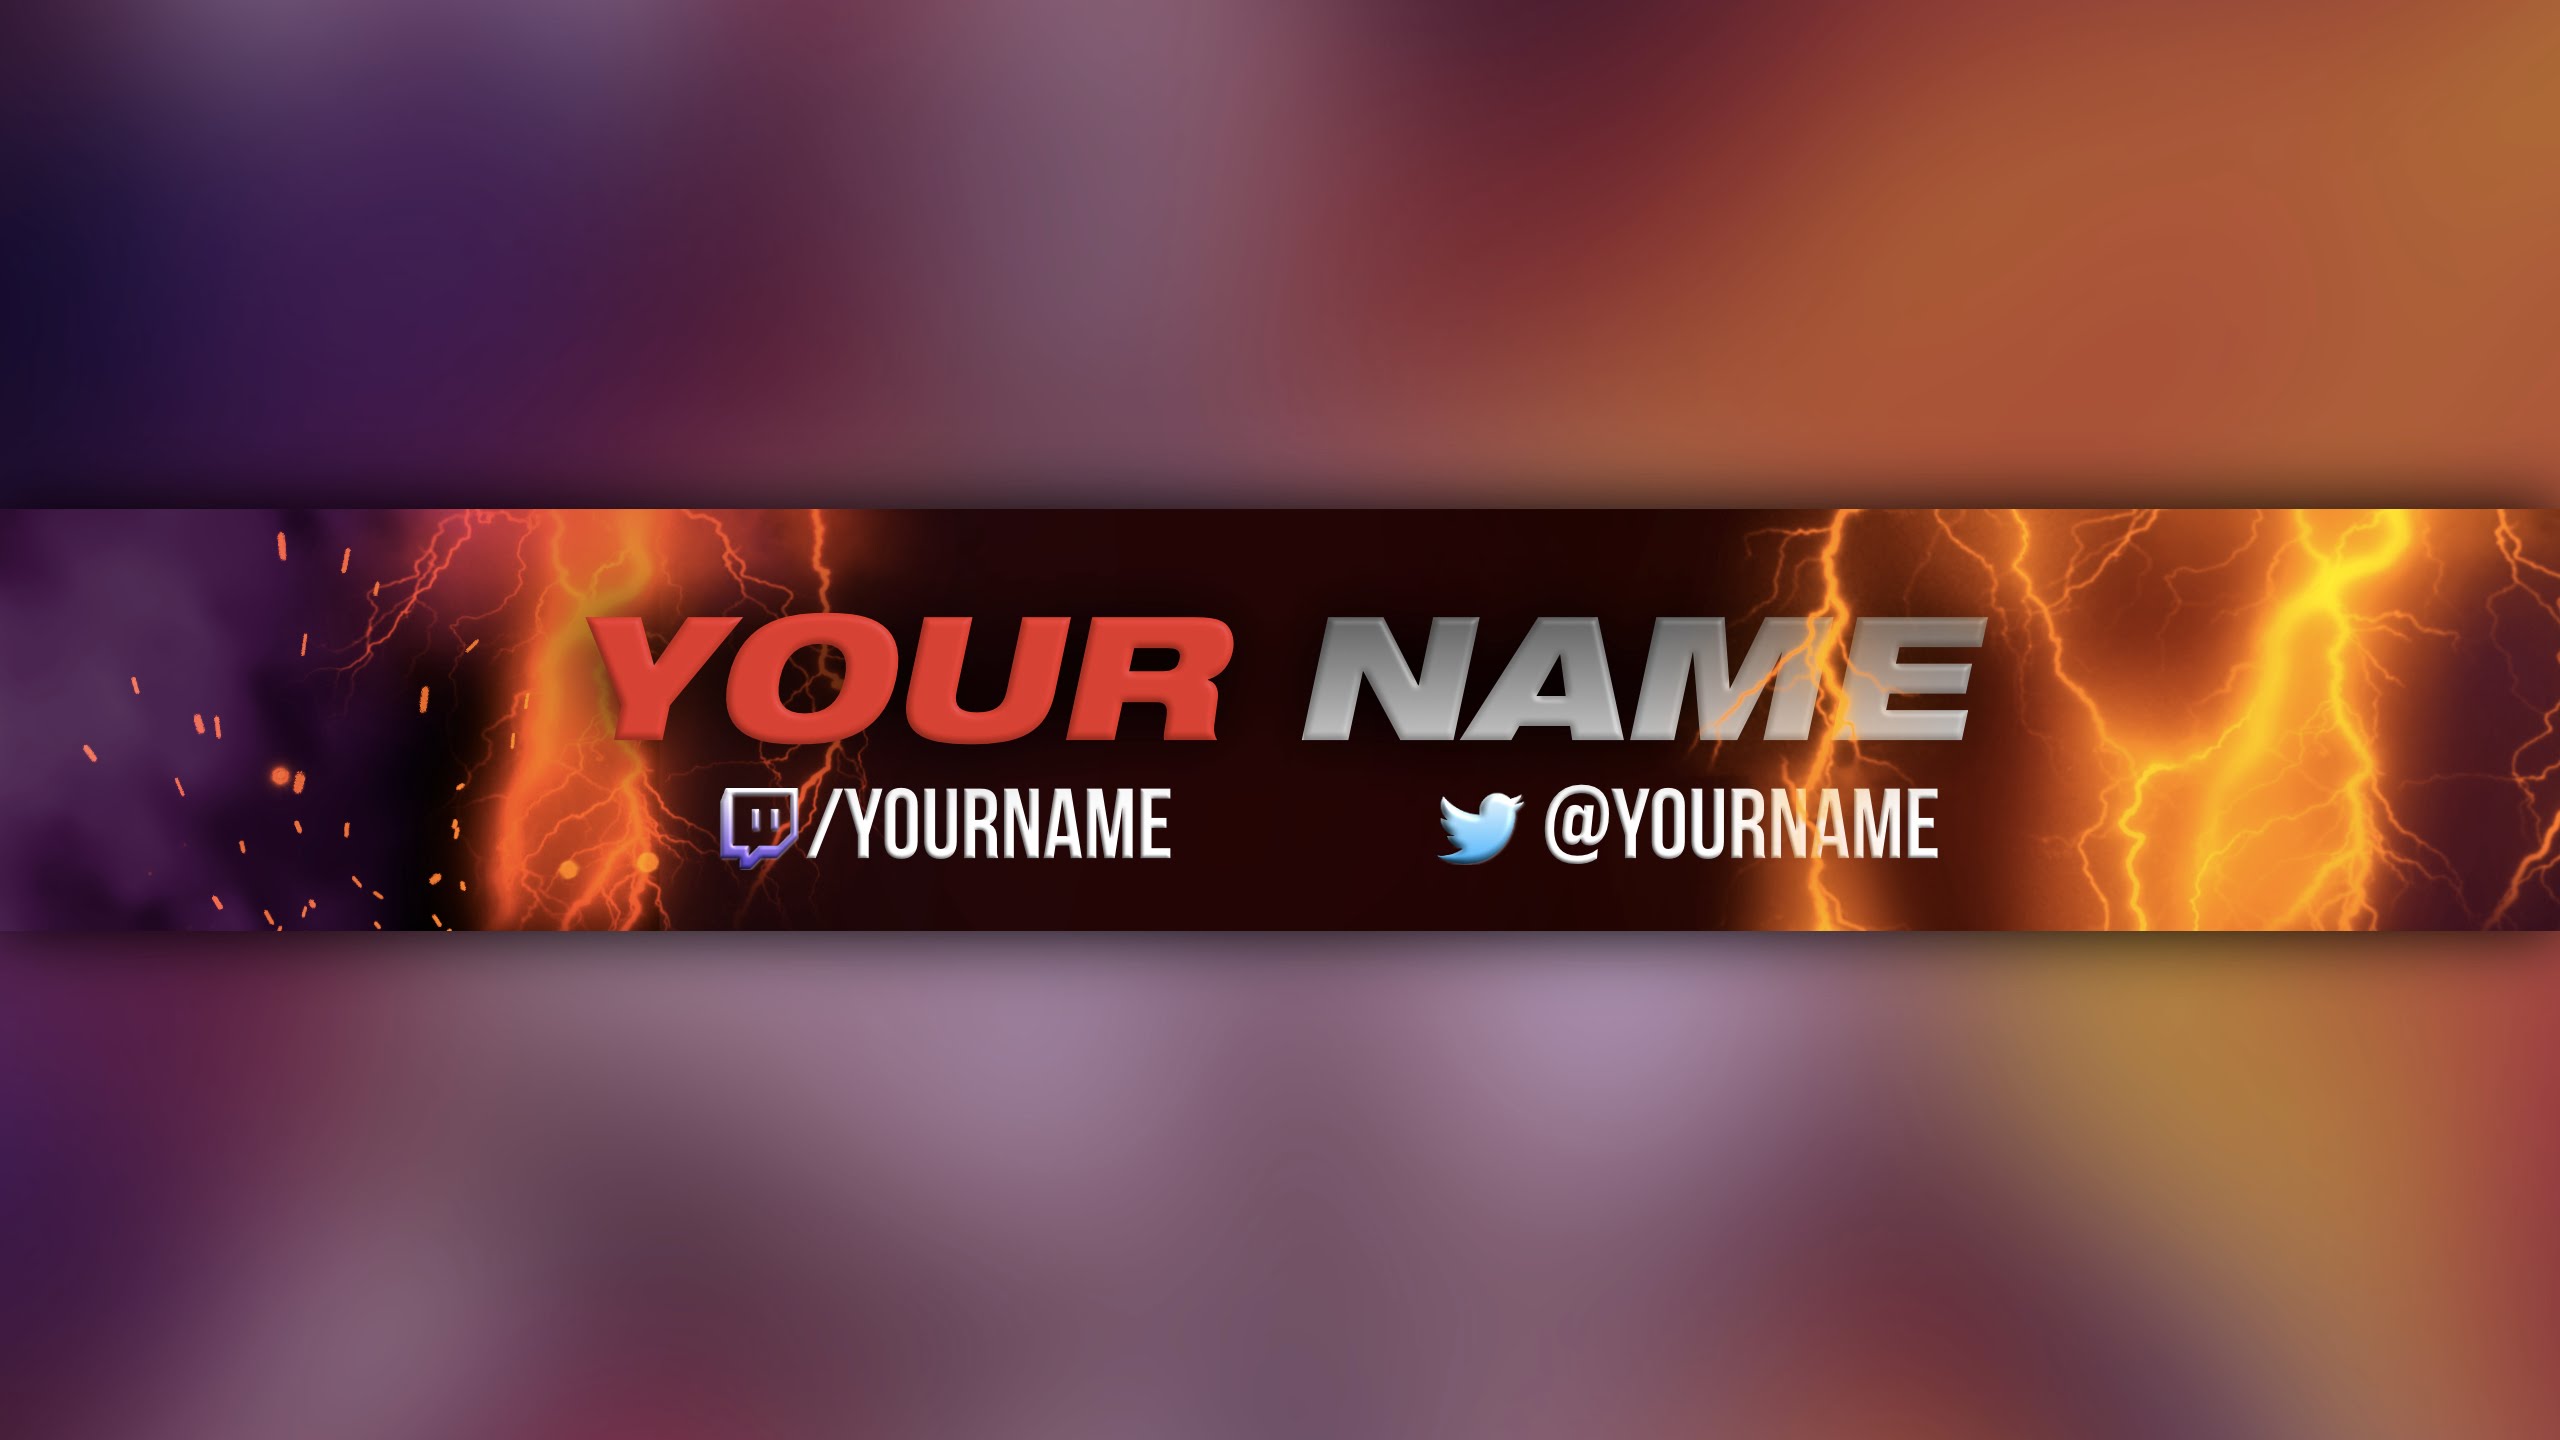 Youtube Banner Free To Use